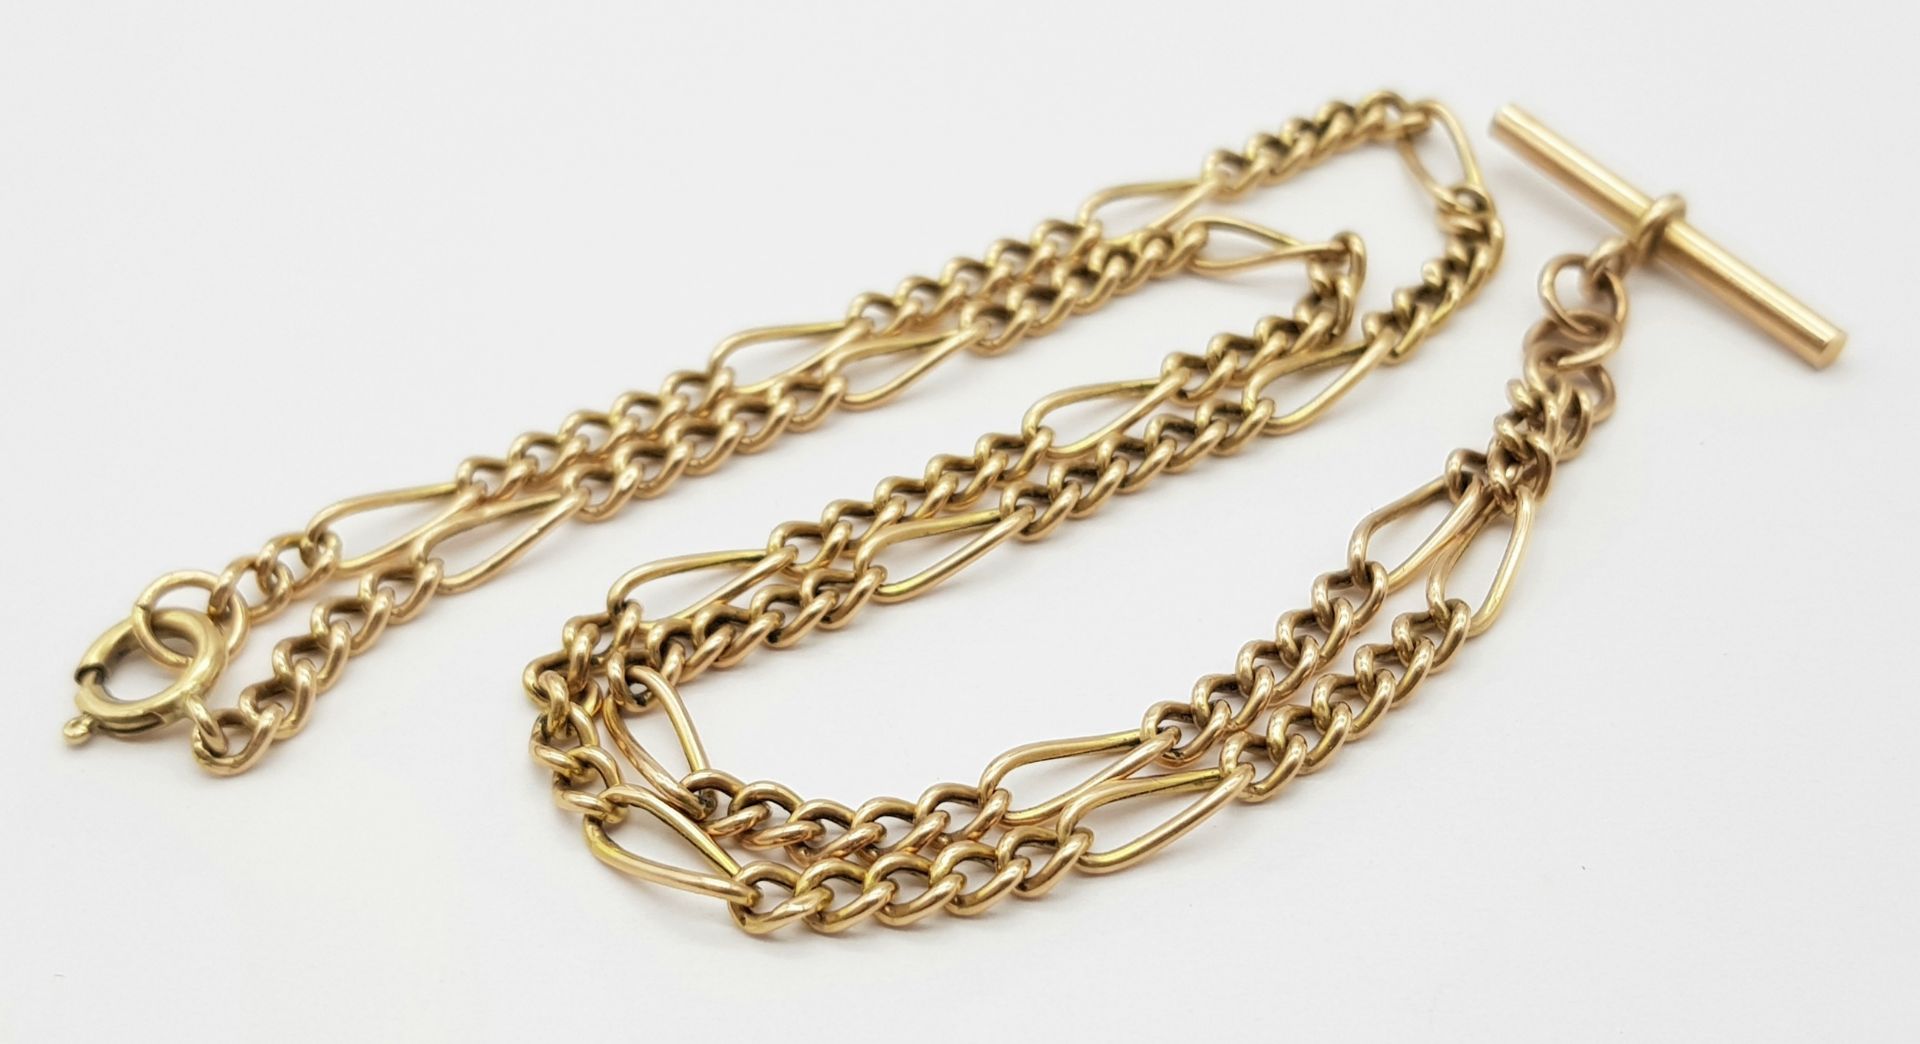 A Vintage 9K Rose Gold Chain with T-Bar. 44cm length. 7.8g - Image 2 of 4